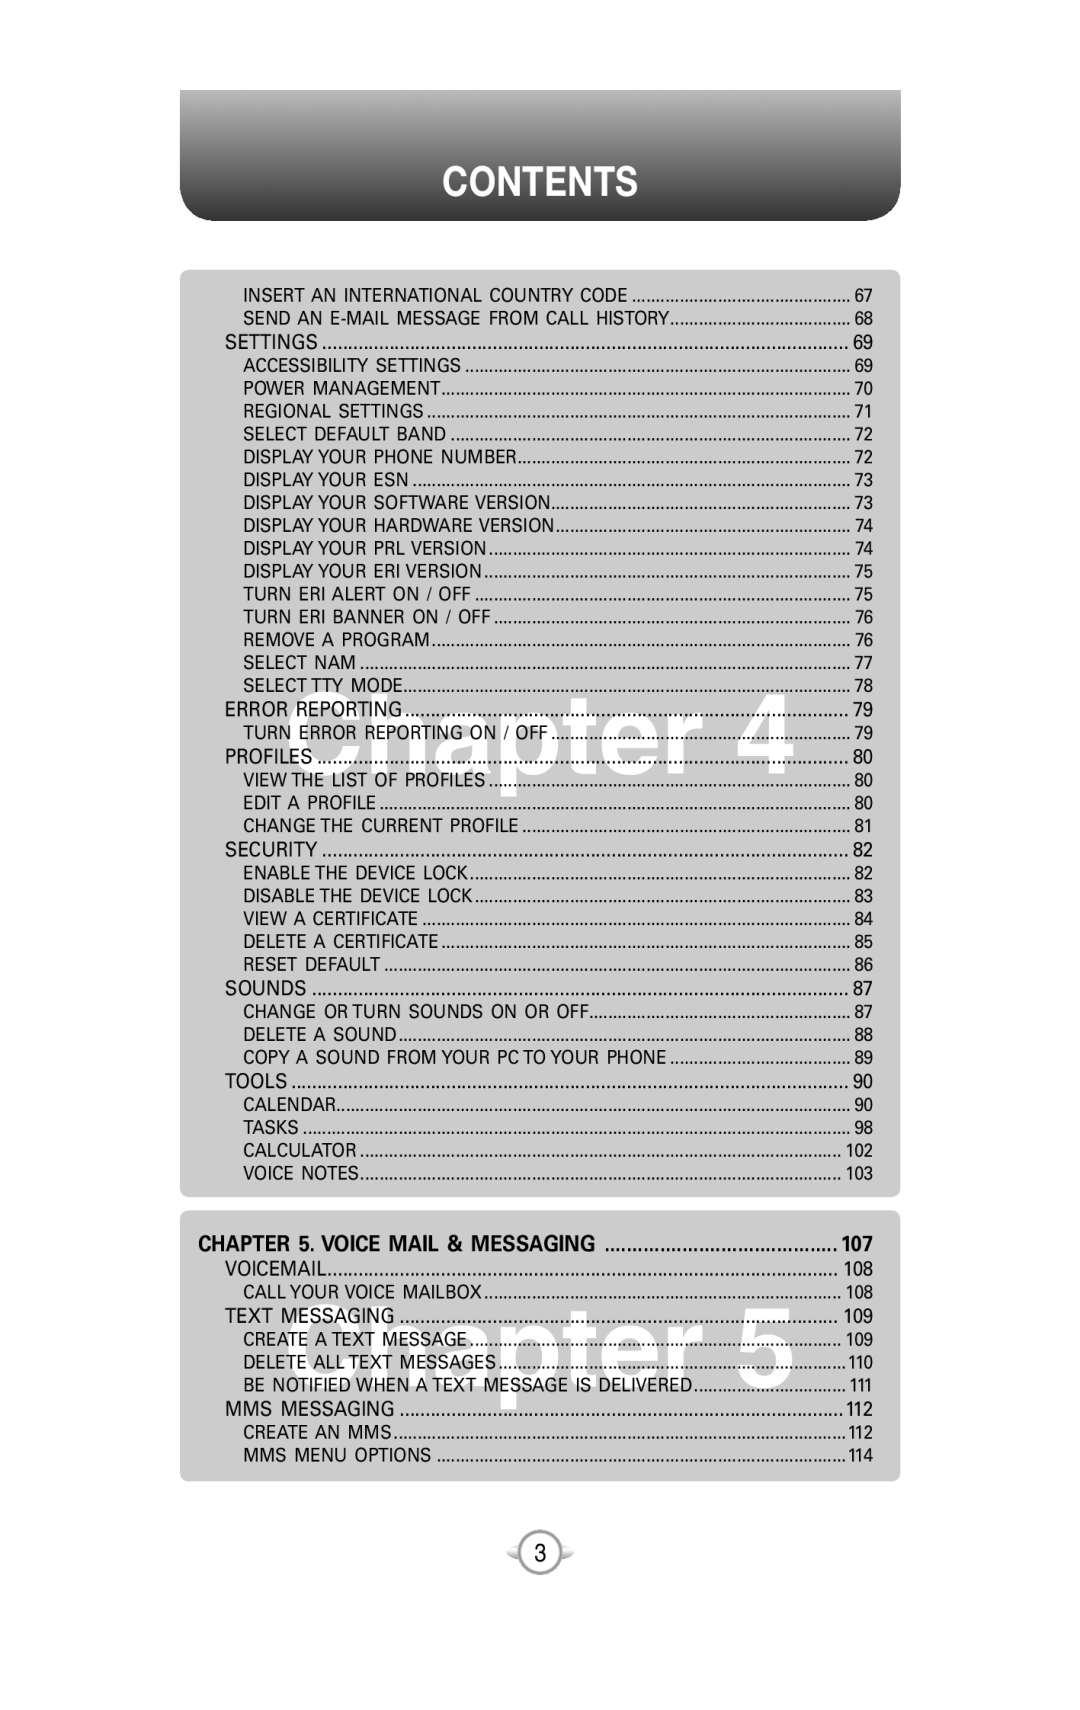 UTStarcom PN-820 user manual VIEWChapter, MMS Chapter, Contents, Voice Mail & Messaging 